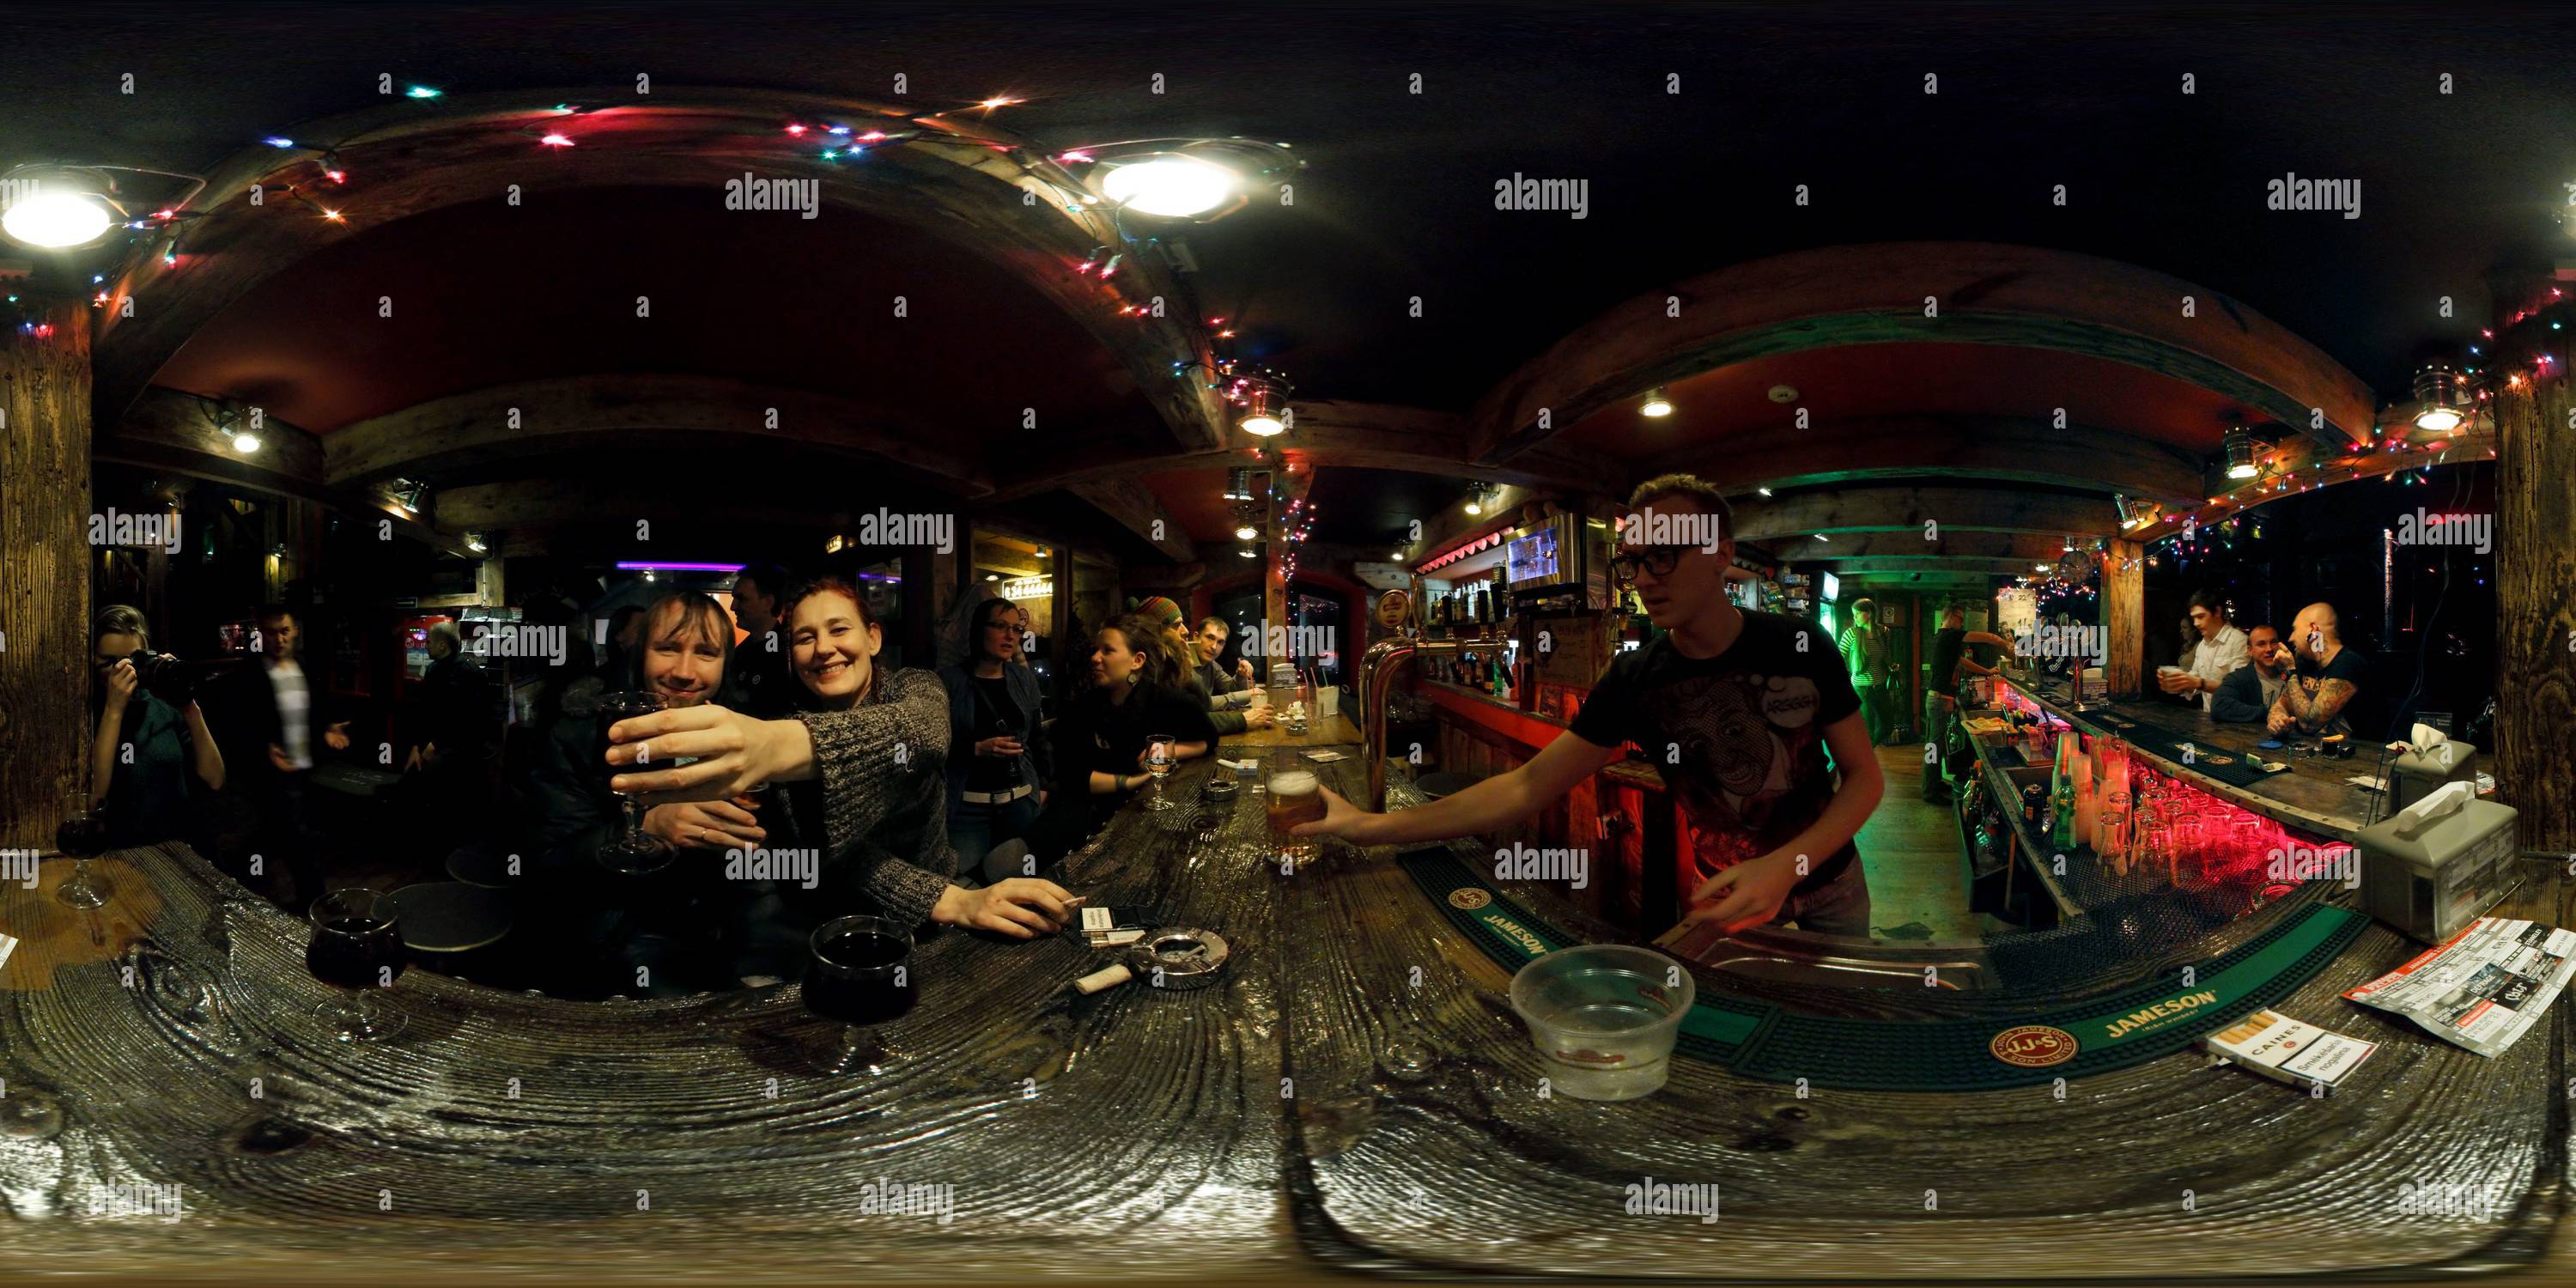 360° view of Yet another friendly evening at the Fontaine Palace rock club  in Liepaja, Latvia - Alamy